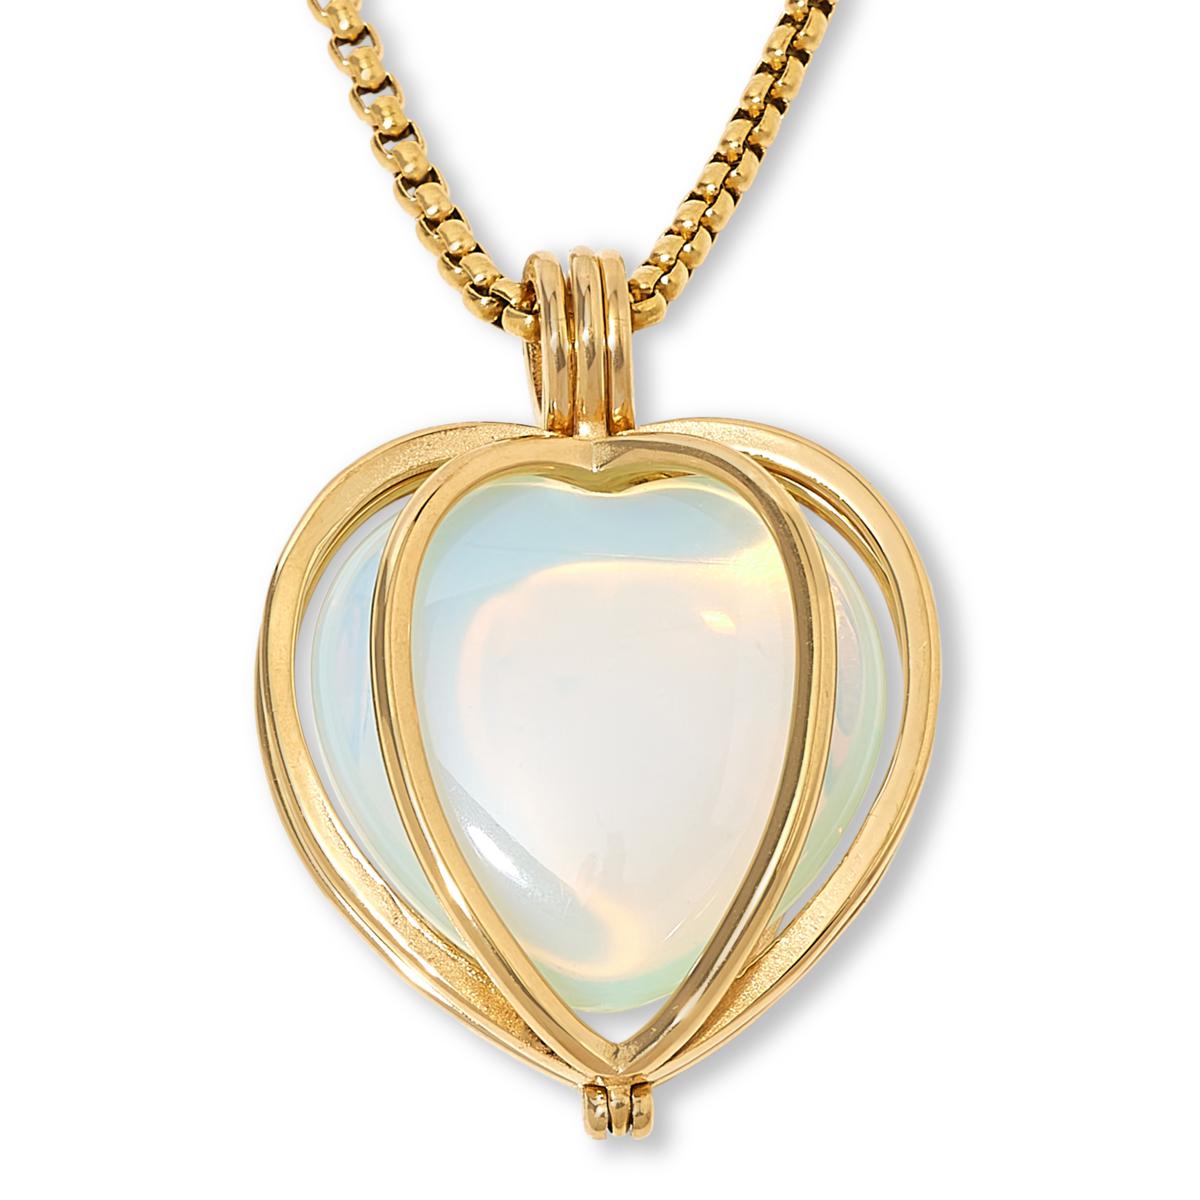 Gold Tone Stainless Steel Convertible Heart Locket with Chakra Gemstones | Adjustable Bolo Chain | 30"